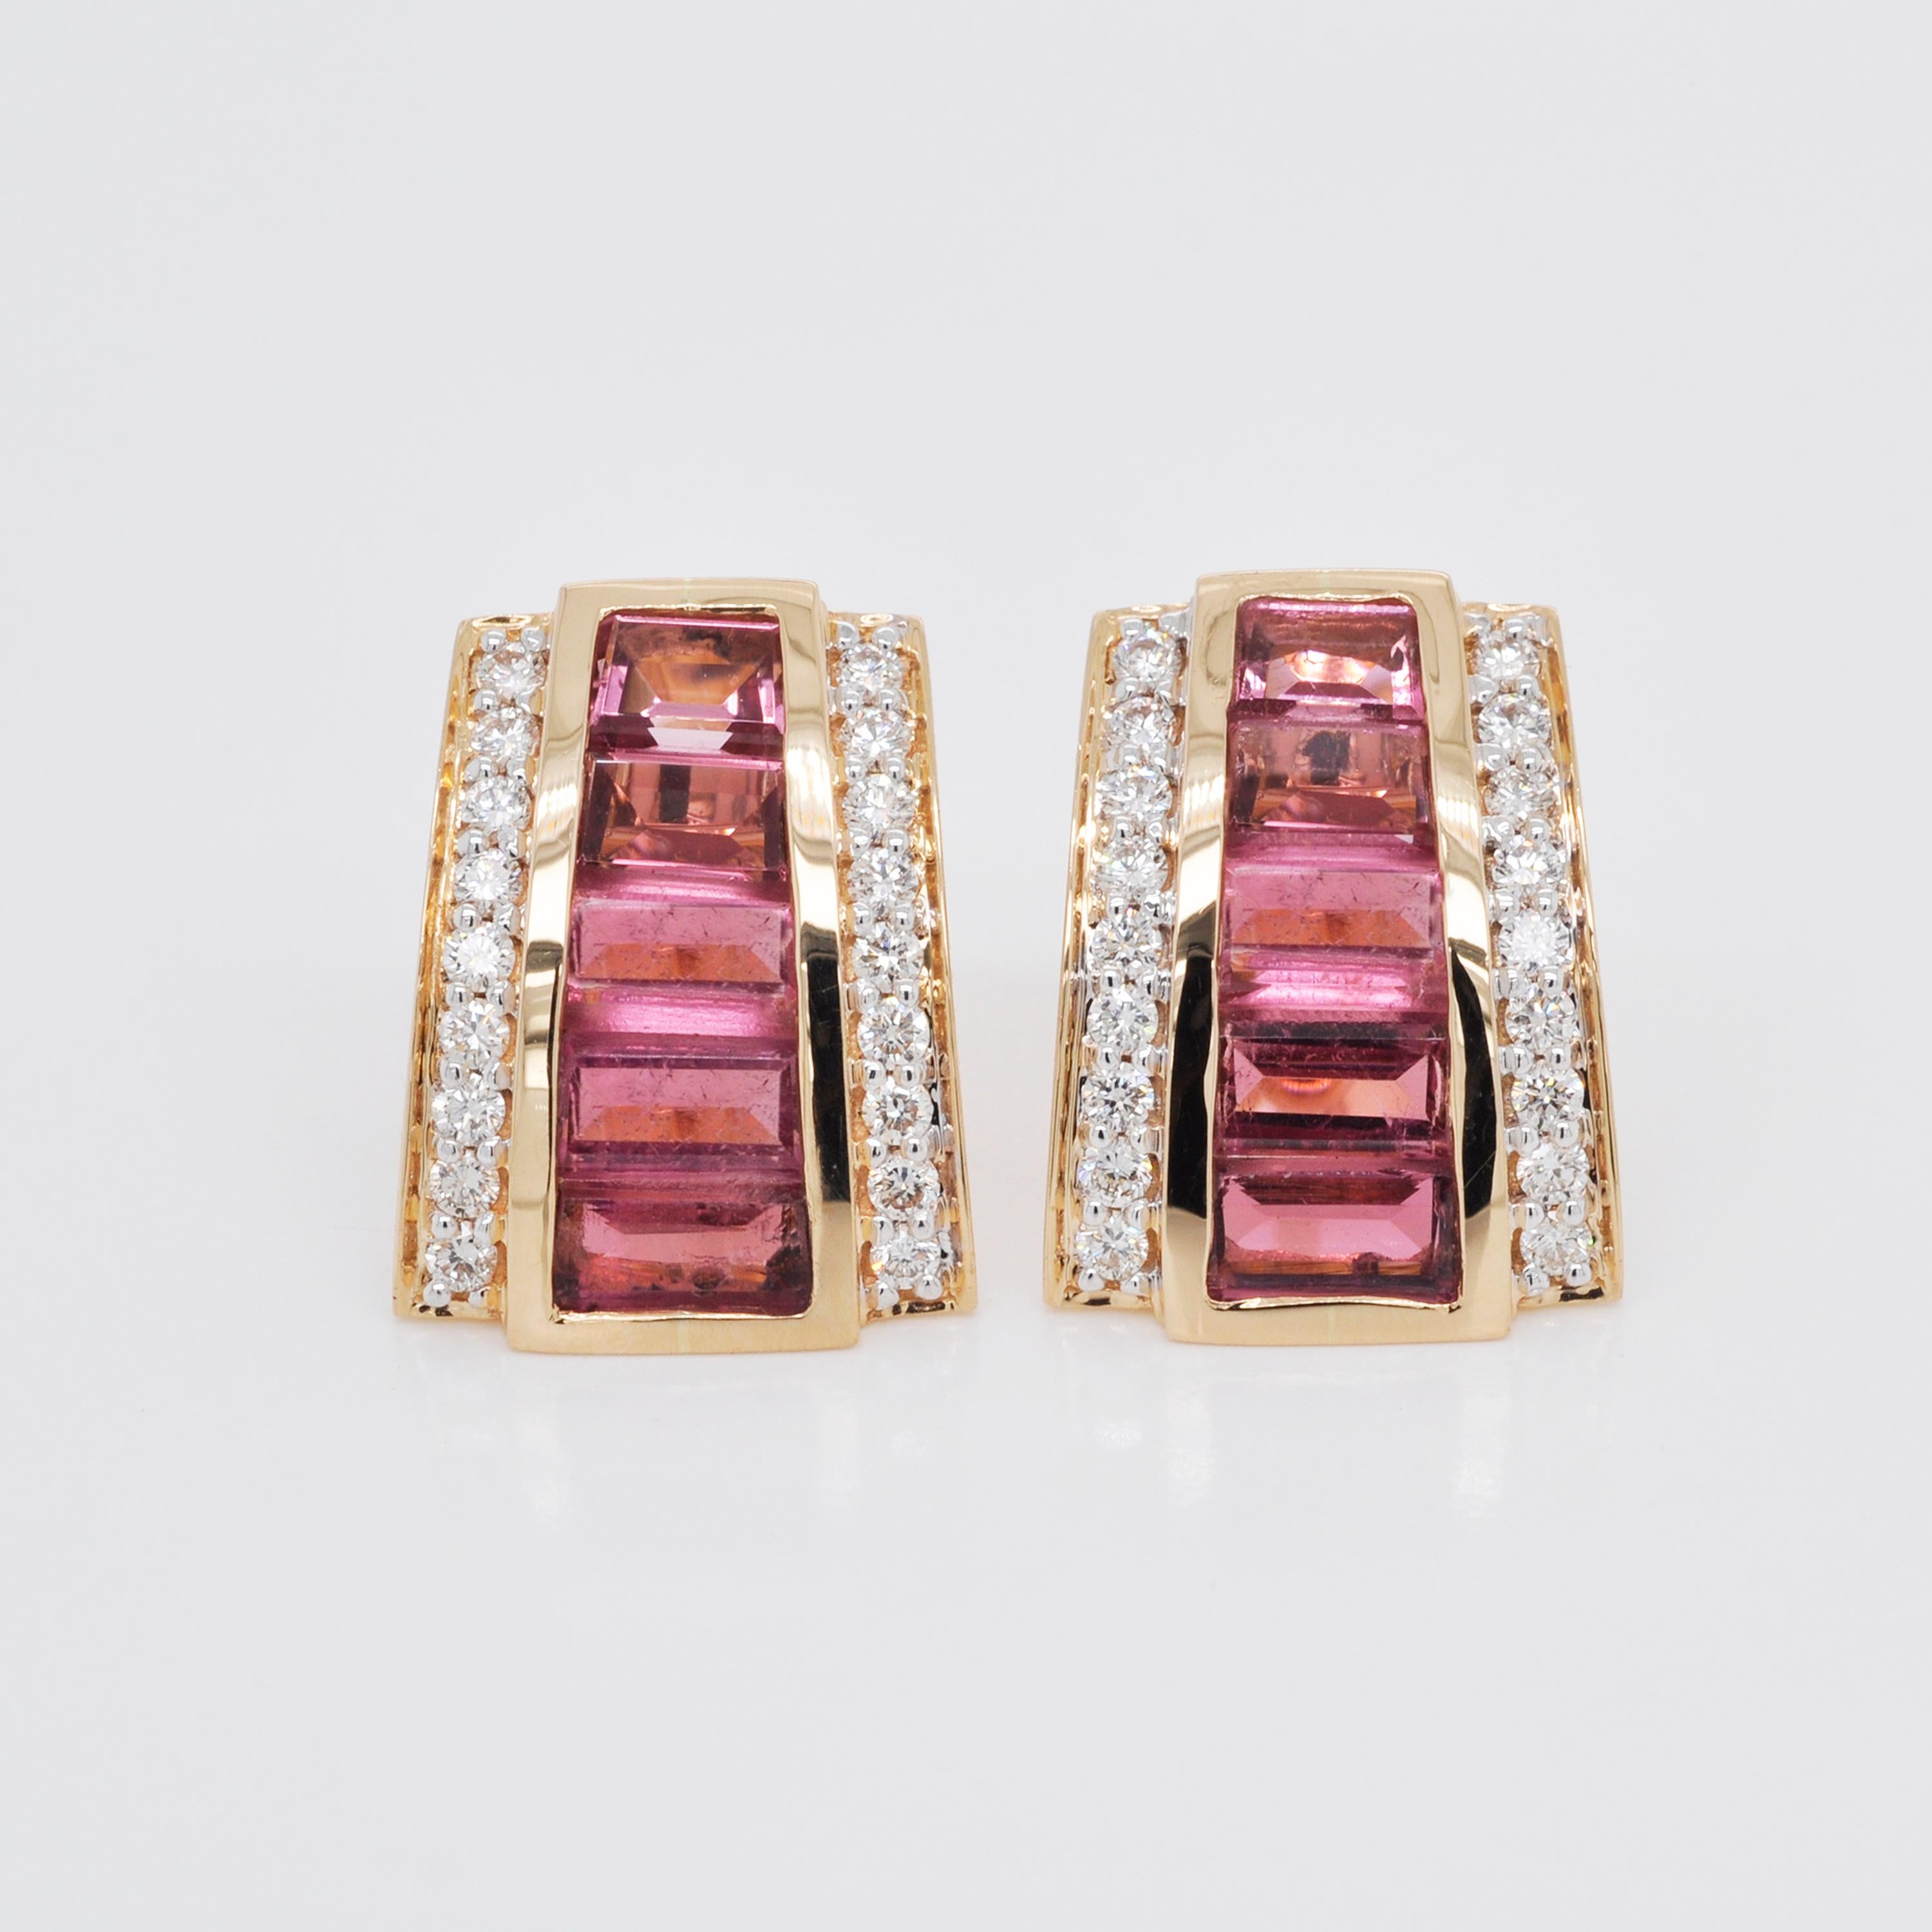 18 Karat Gold Pink Tourmaline Calibre Cut Channel Set Baguette Diamond Ear-Clips In New Condition For Sale In Jaipur, Rajasthan